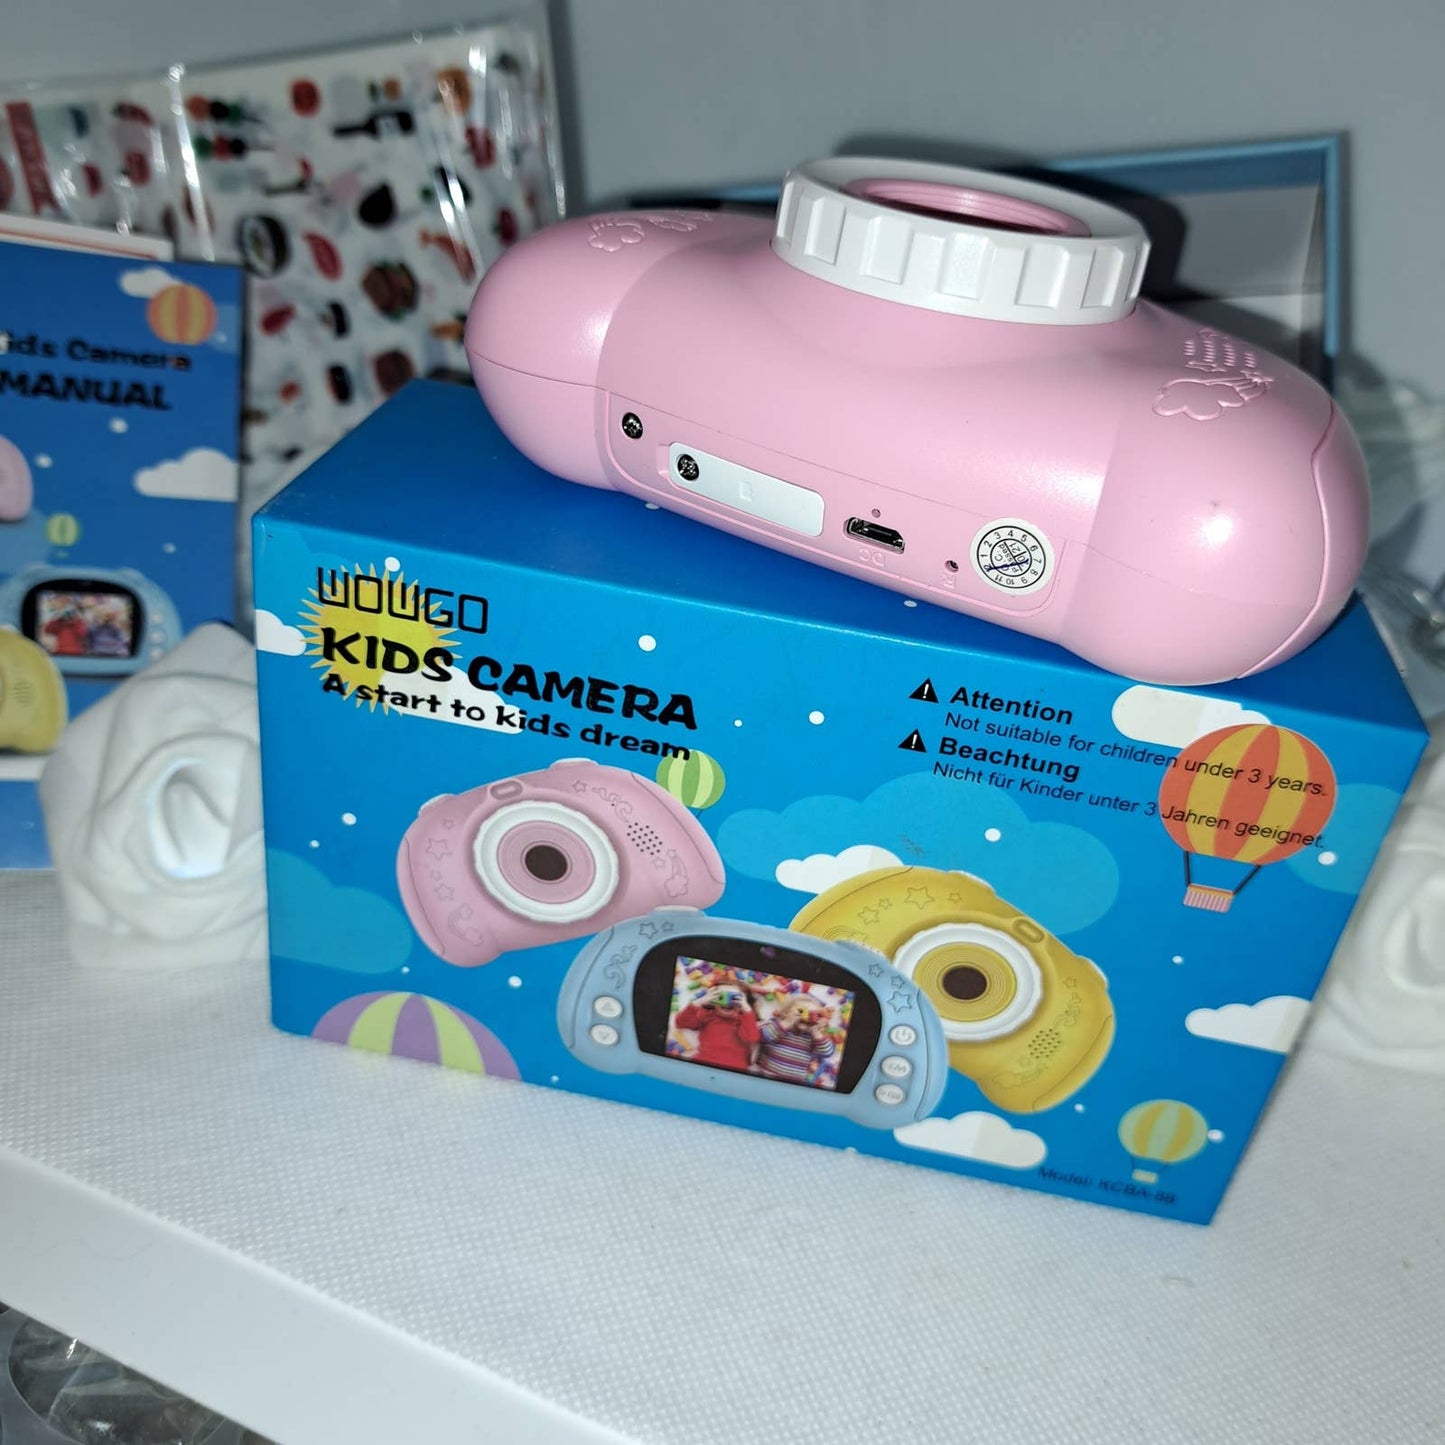 WOWGO Kids Digital Camera - 12MP Children's Camera with Large Screen NEW